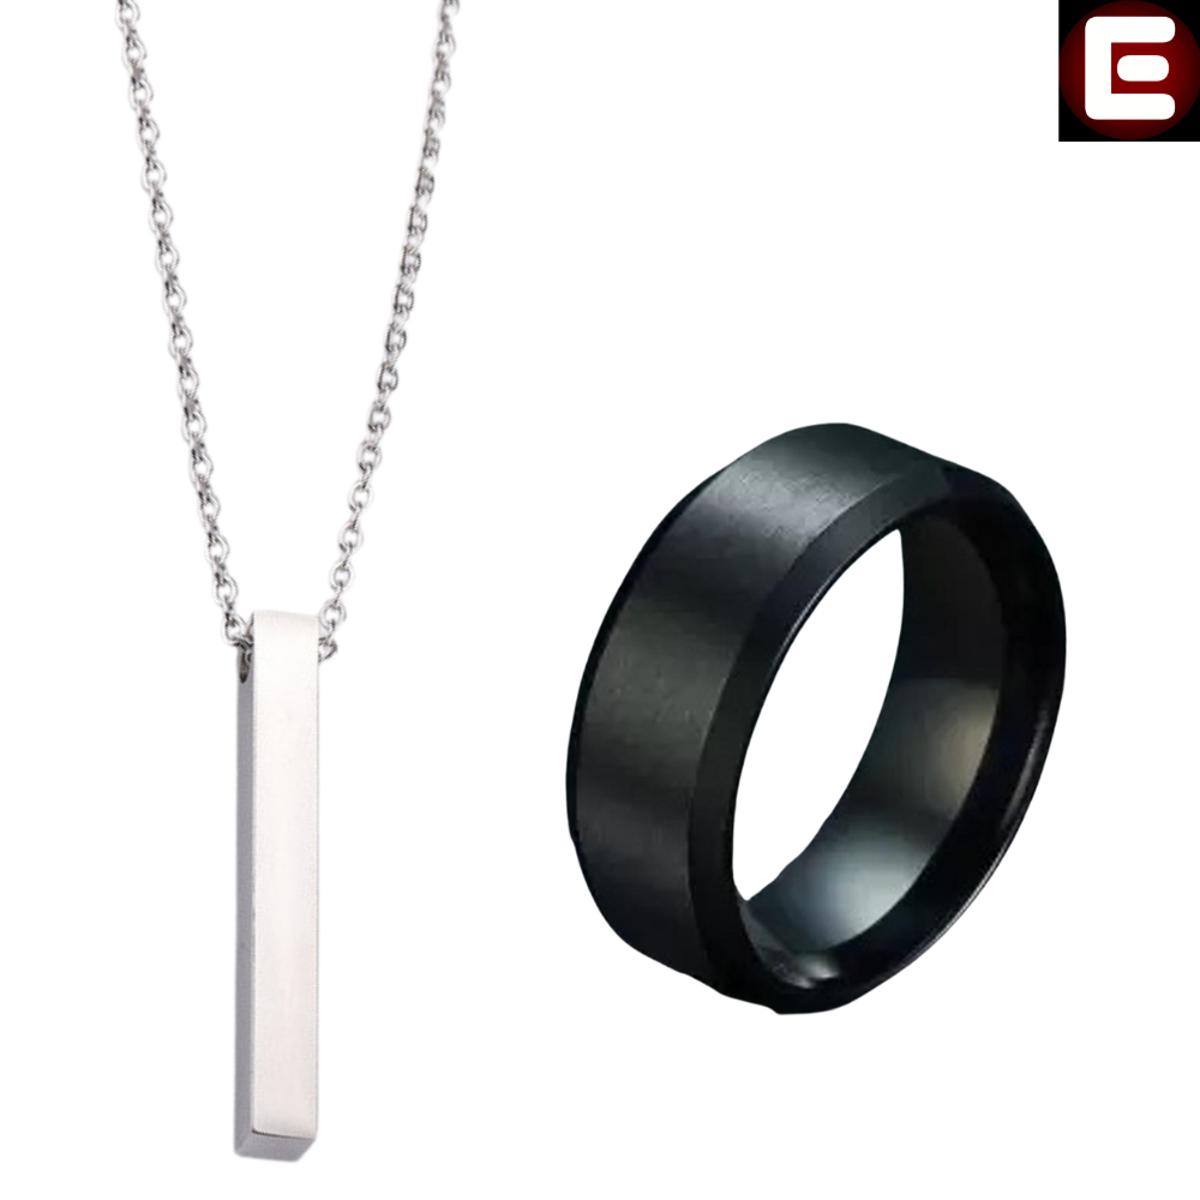 EMPIRON PACK OF 2 STAINLESS SILVER BAR NECKLACE + STAINLESS STEEL RINGS FOR BOYS / FOR MEN